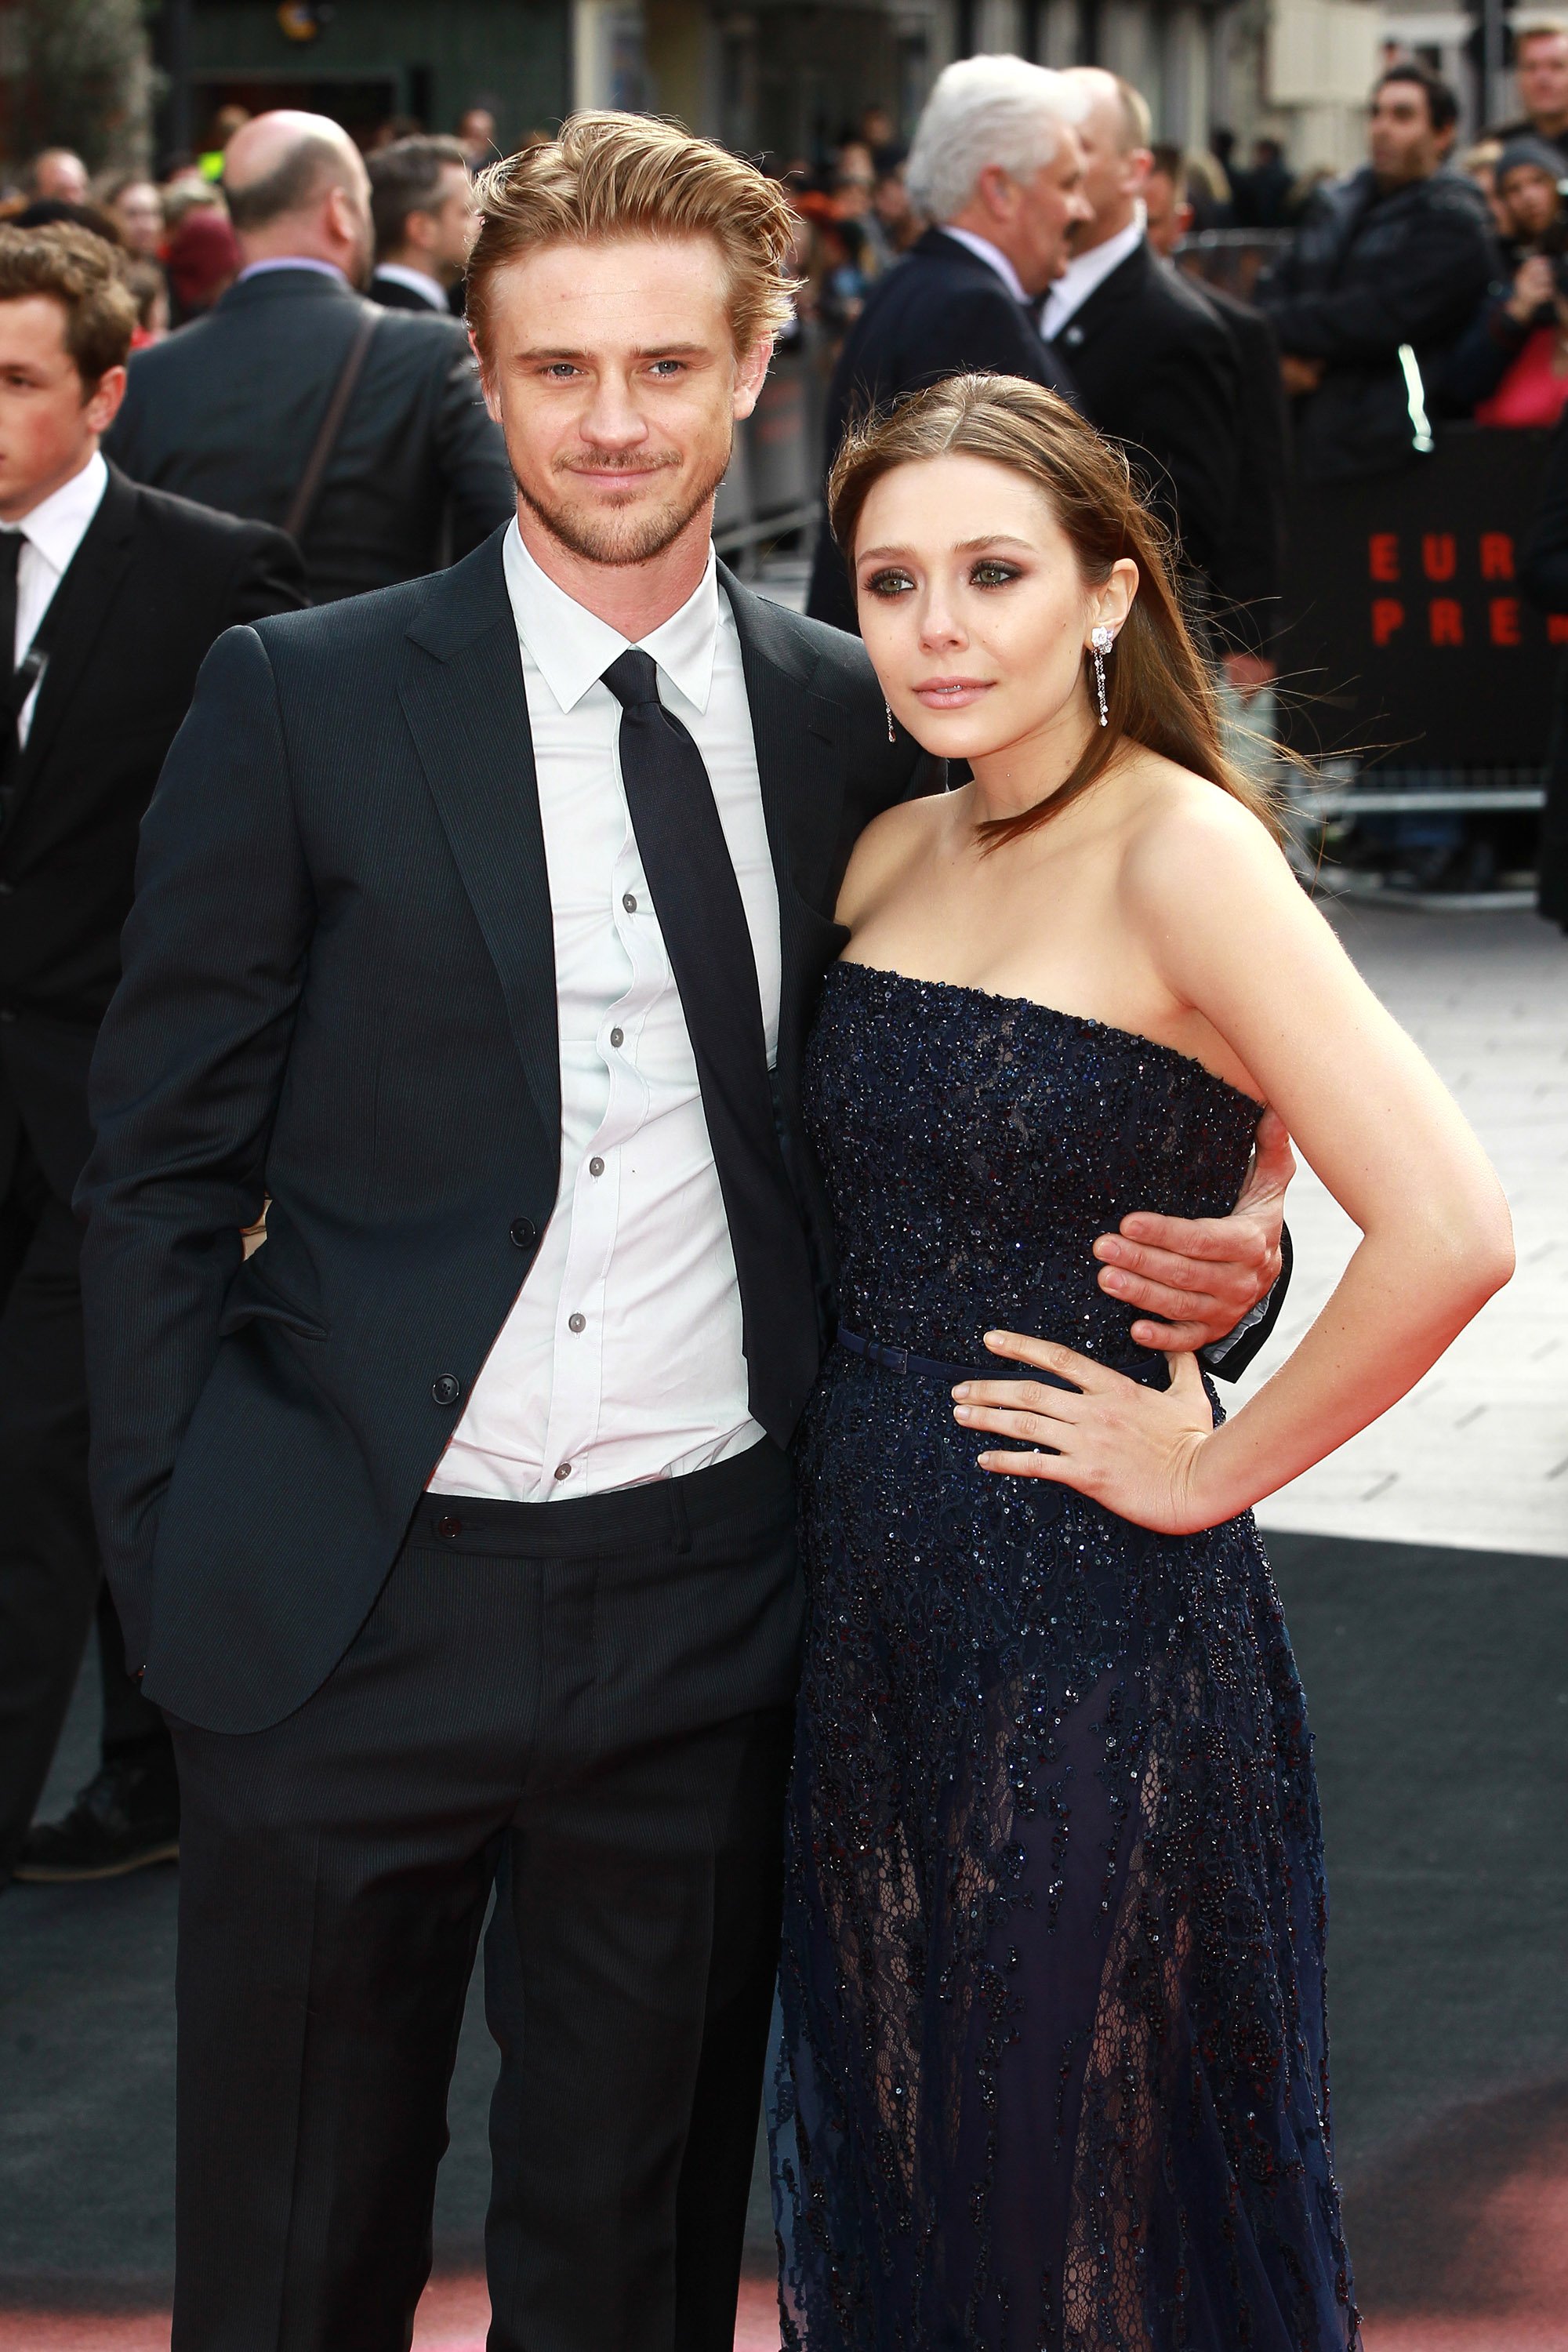 Elizabeth Olsen and Boyd Holbrook at the premiere of "Godzilla" on May 11, 2014 | Source: Getty Images